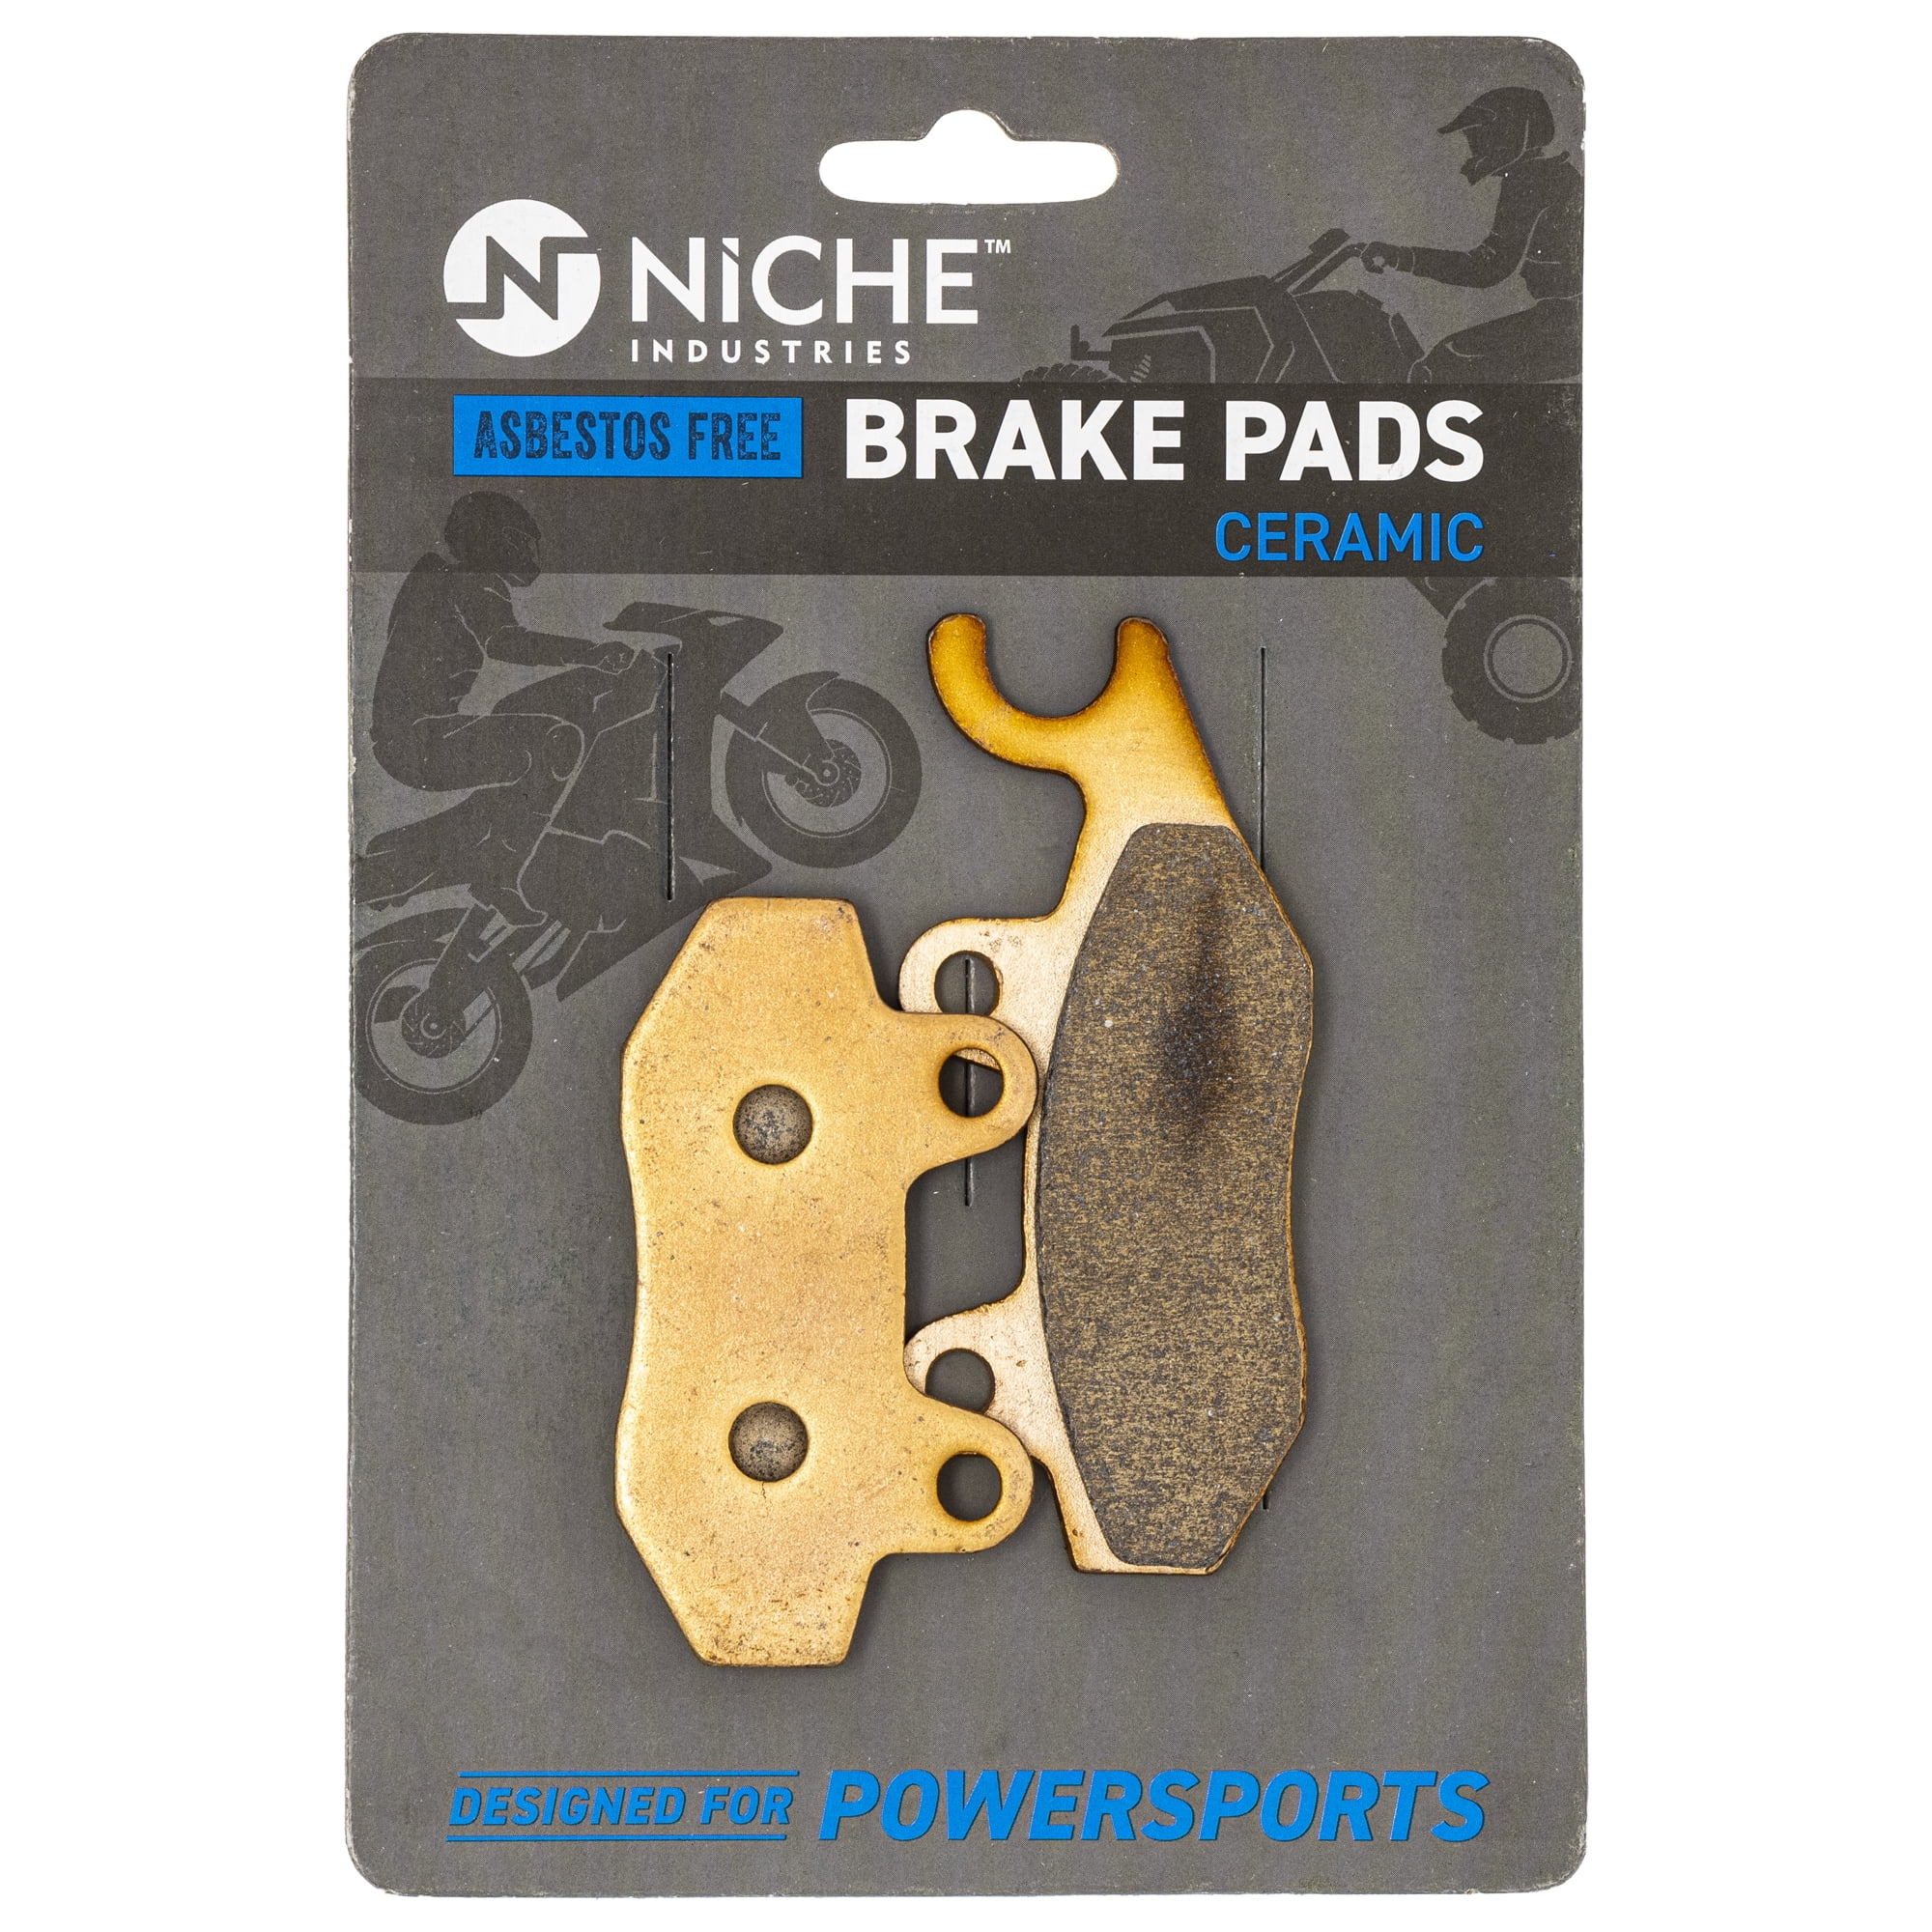 Front PowerSport Ceramic Series Brake Pad With Rubber Steel Rubber Shims